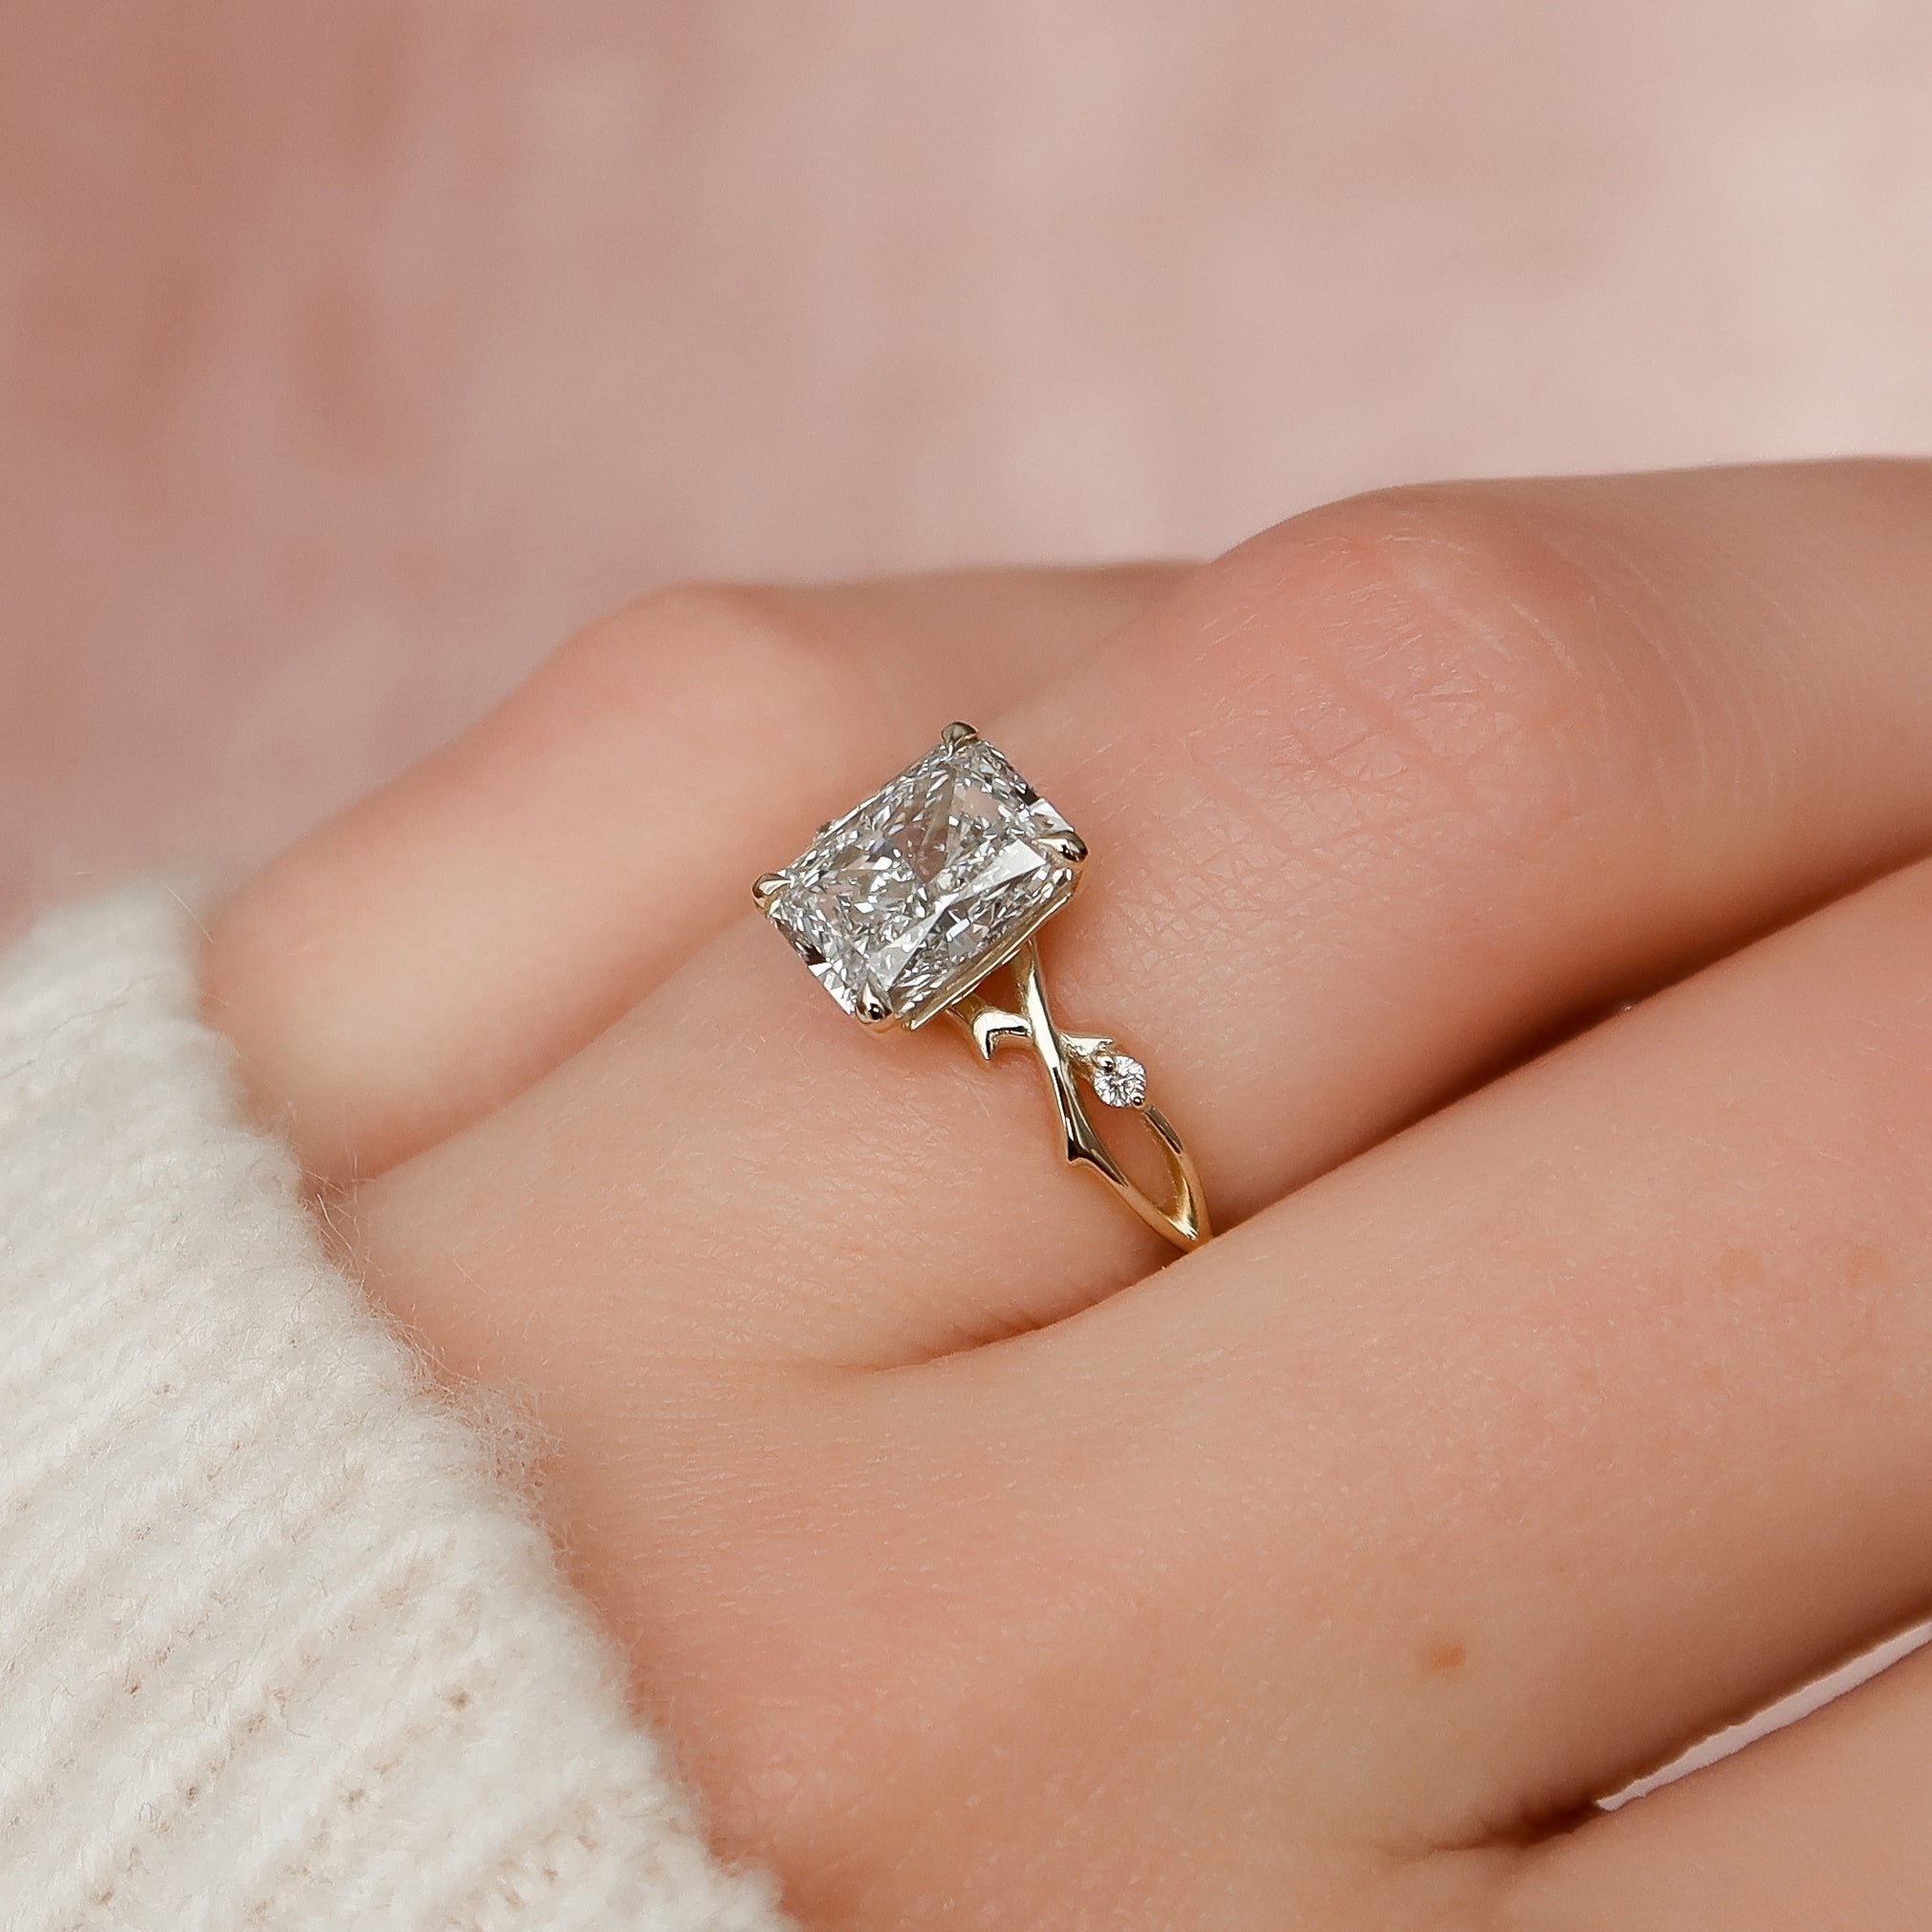 Best Match: Oval Engagement Ring With Wedding Band